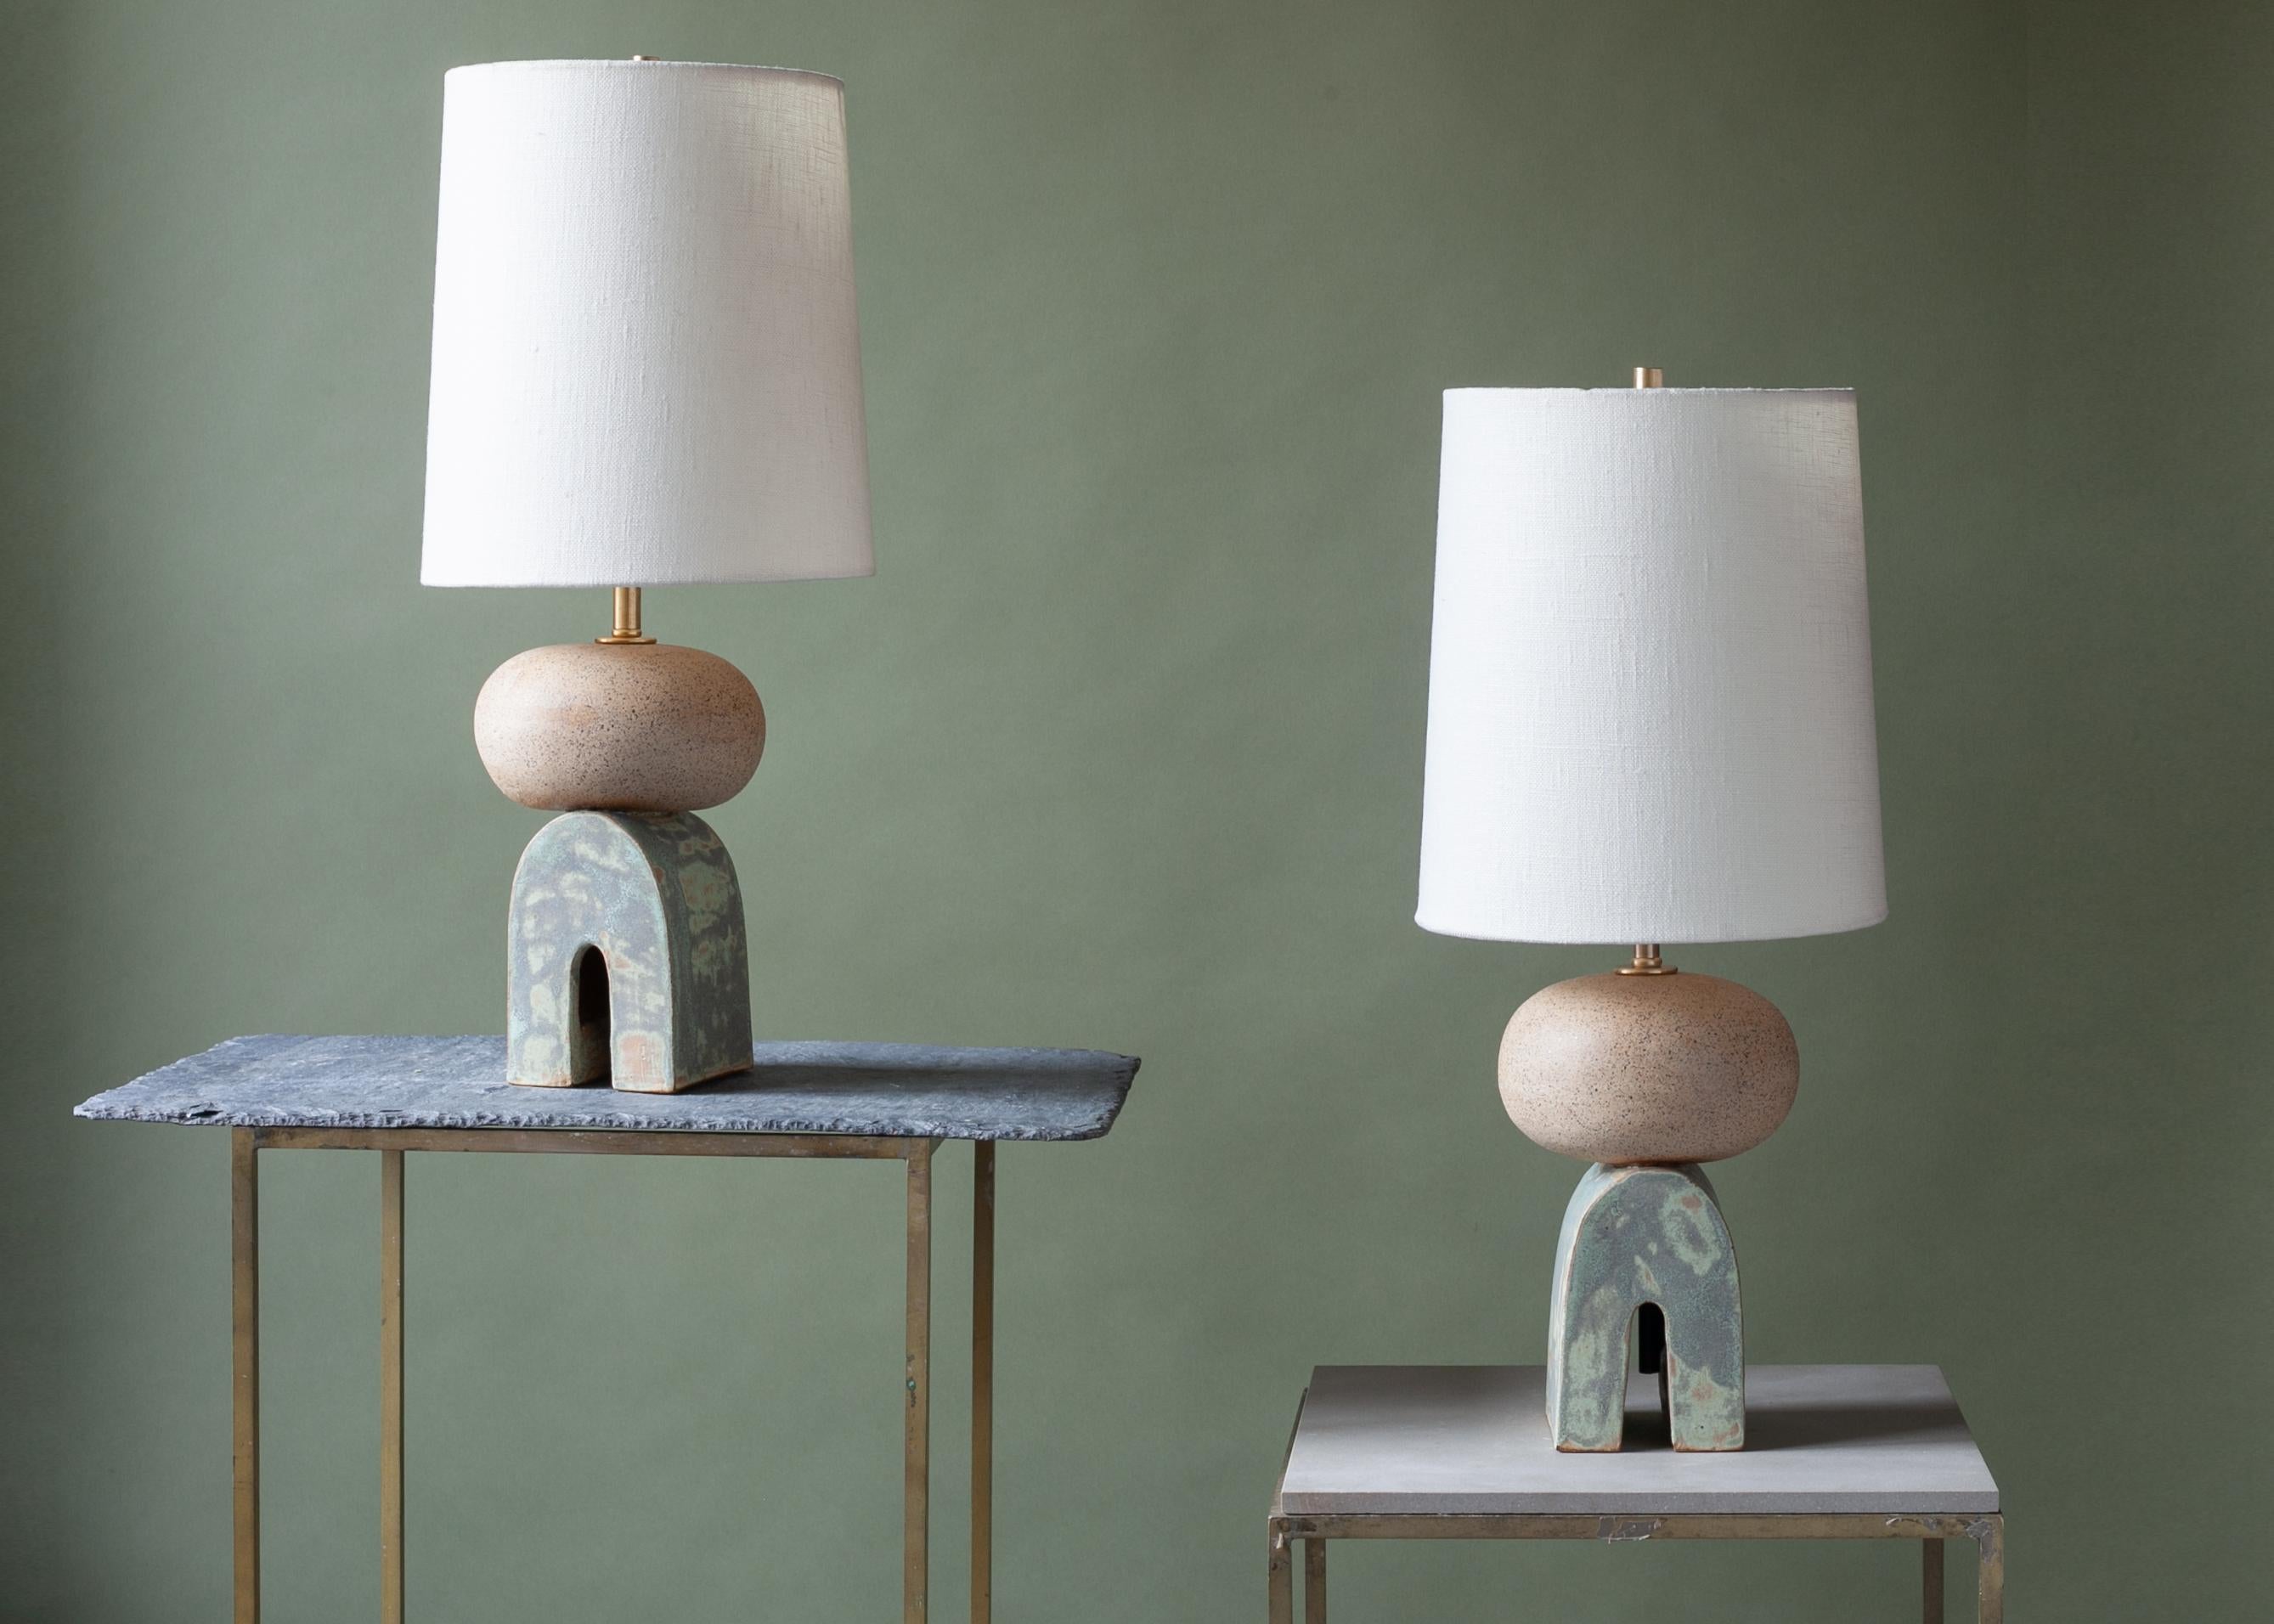 One of a kind, pair of ceramic lamps, thrown on the potters wheel and assembled by hand. The lamp base is comprised of two different clay bodies, with white underglaze and coppery green glaze. This piece was inspired by seashells and smooth stones